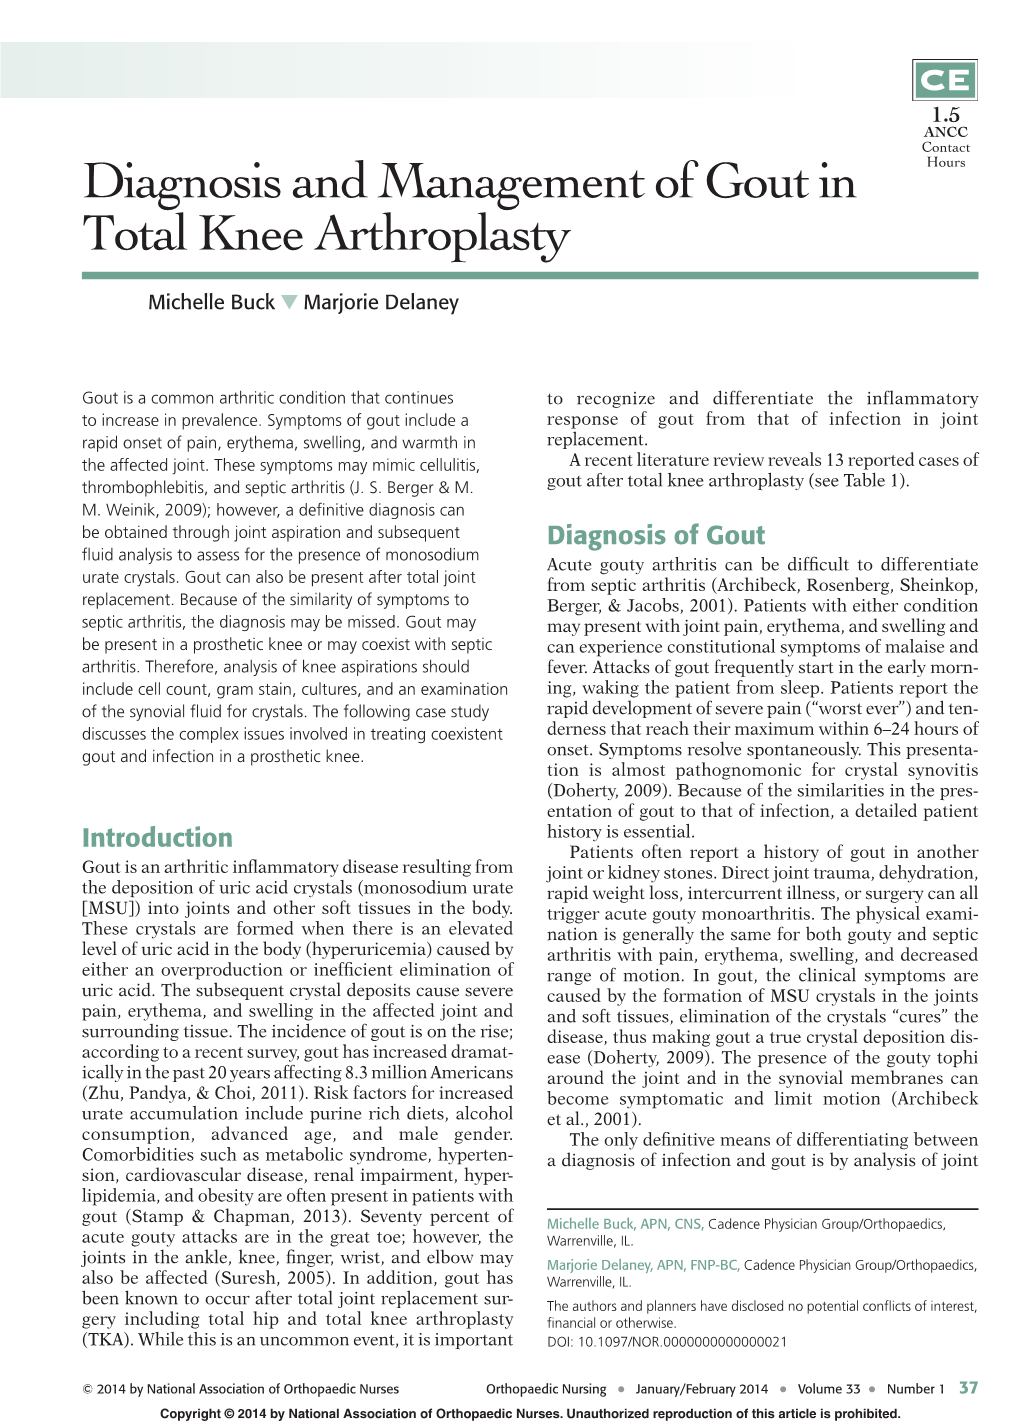 Diagnosis and Management of Gout in Total Knee Arthroplasty